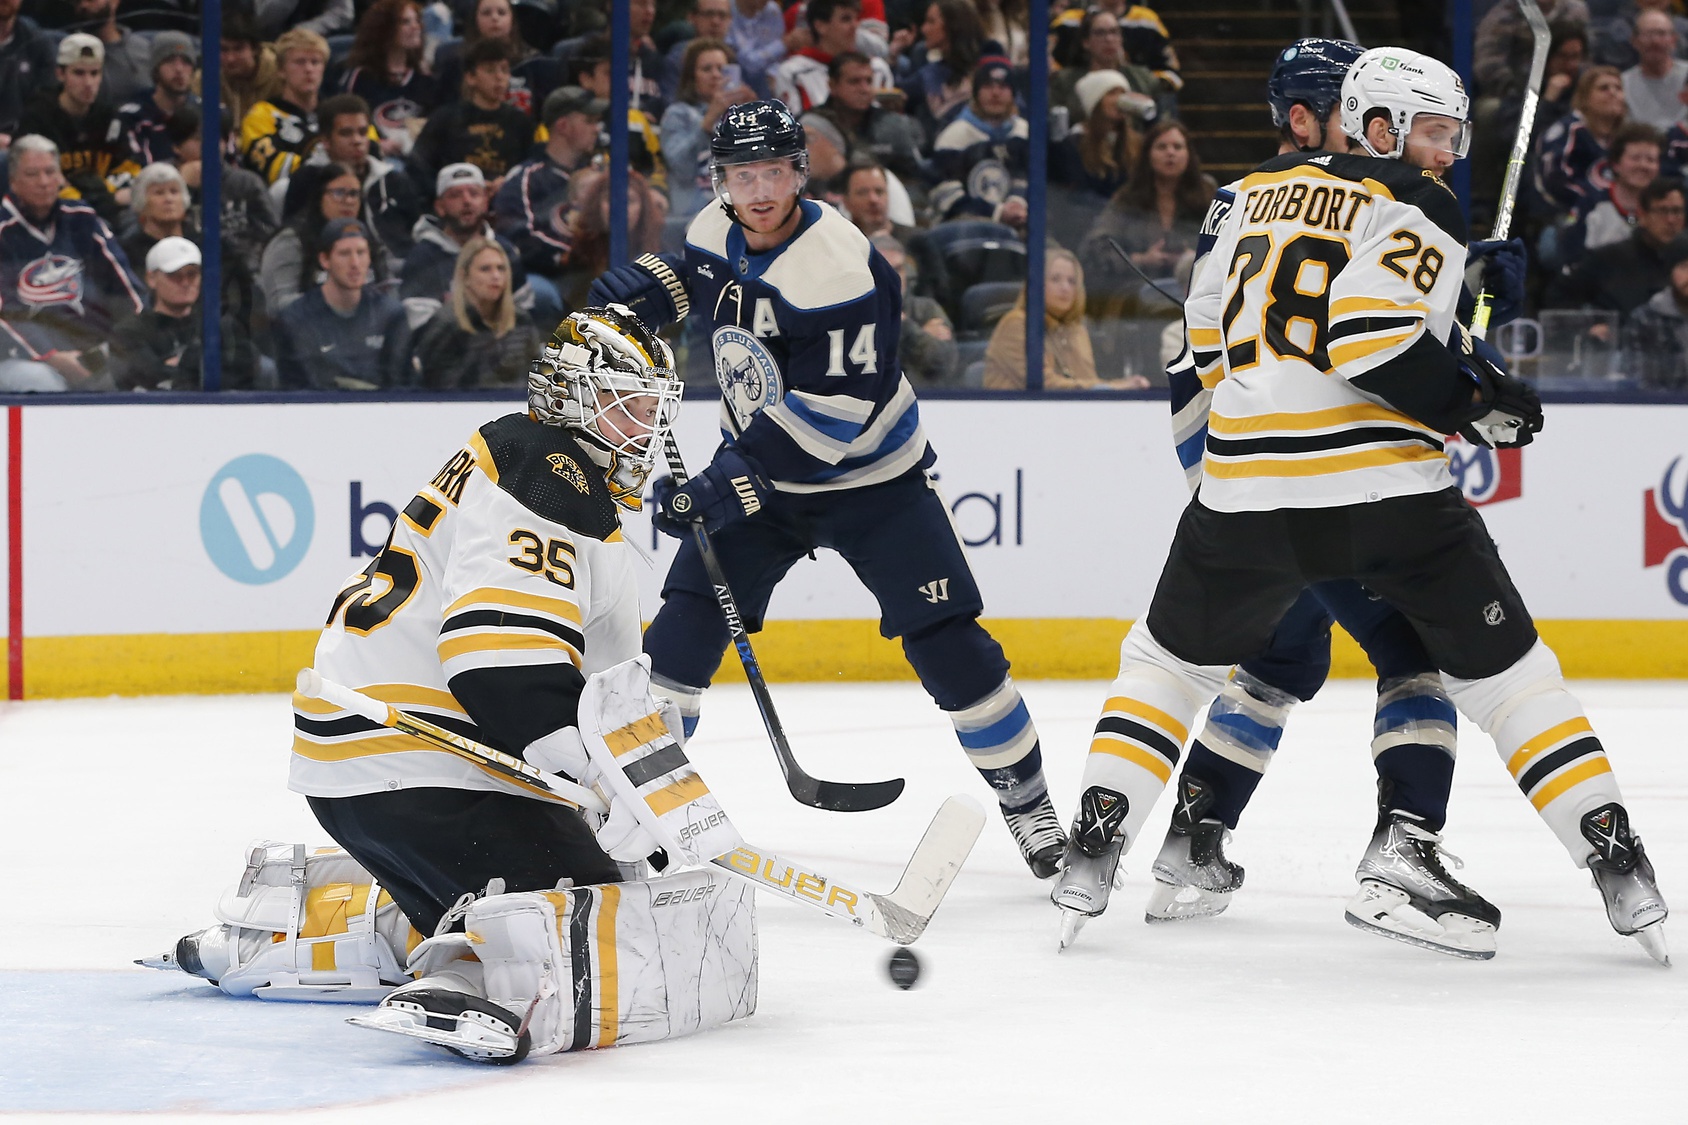 Oct 28, 2022; Columbus, Ohio, USA; Boston Bruins goalie Linus Ullmark (35) makes a save against the Columbus Blue Jackets during the second period at Nationwide Arena. Mandatory Credit: Russell LaBounty/USA TODAY Sports